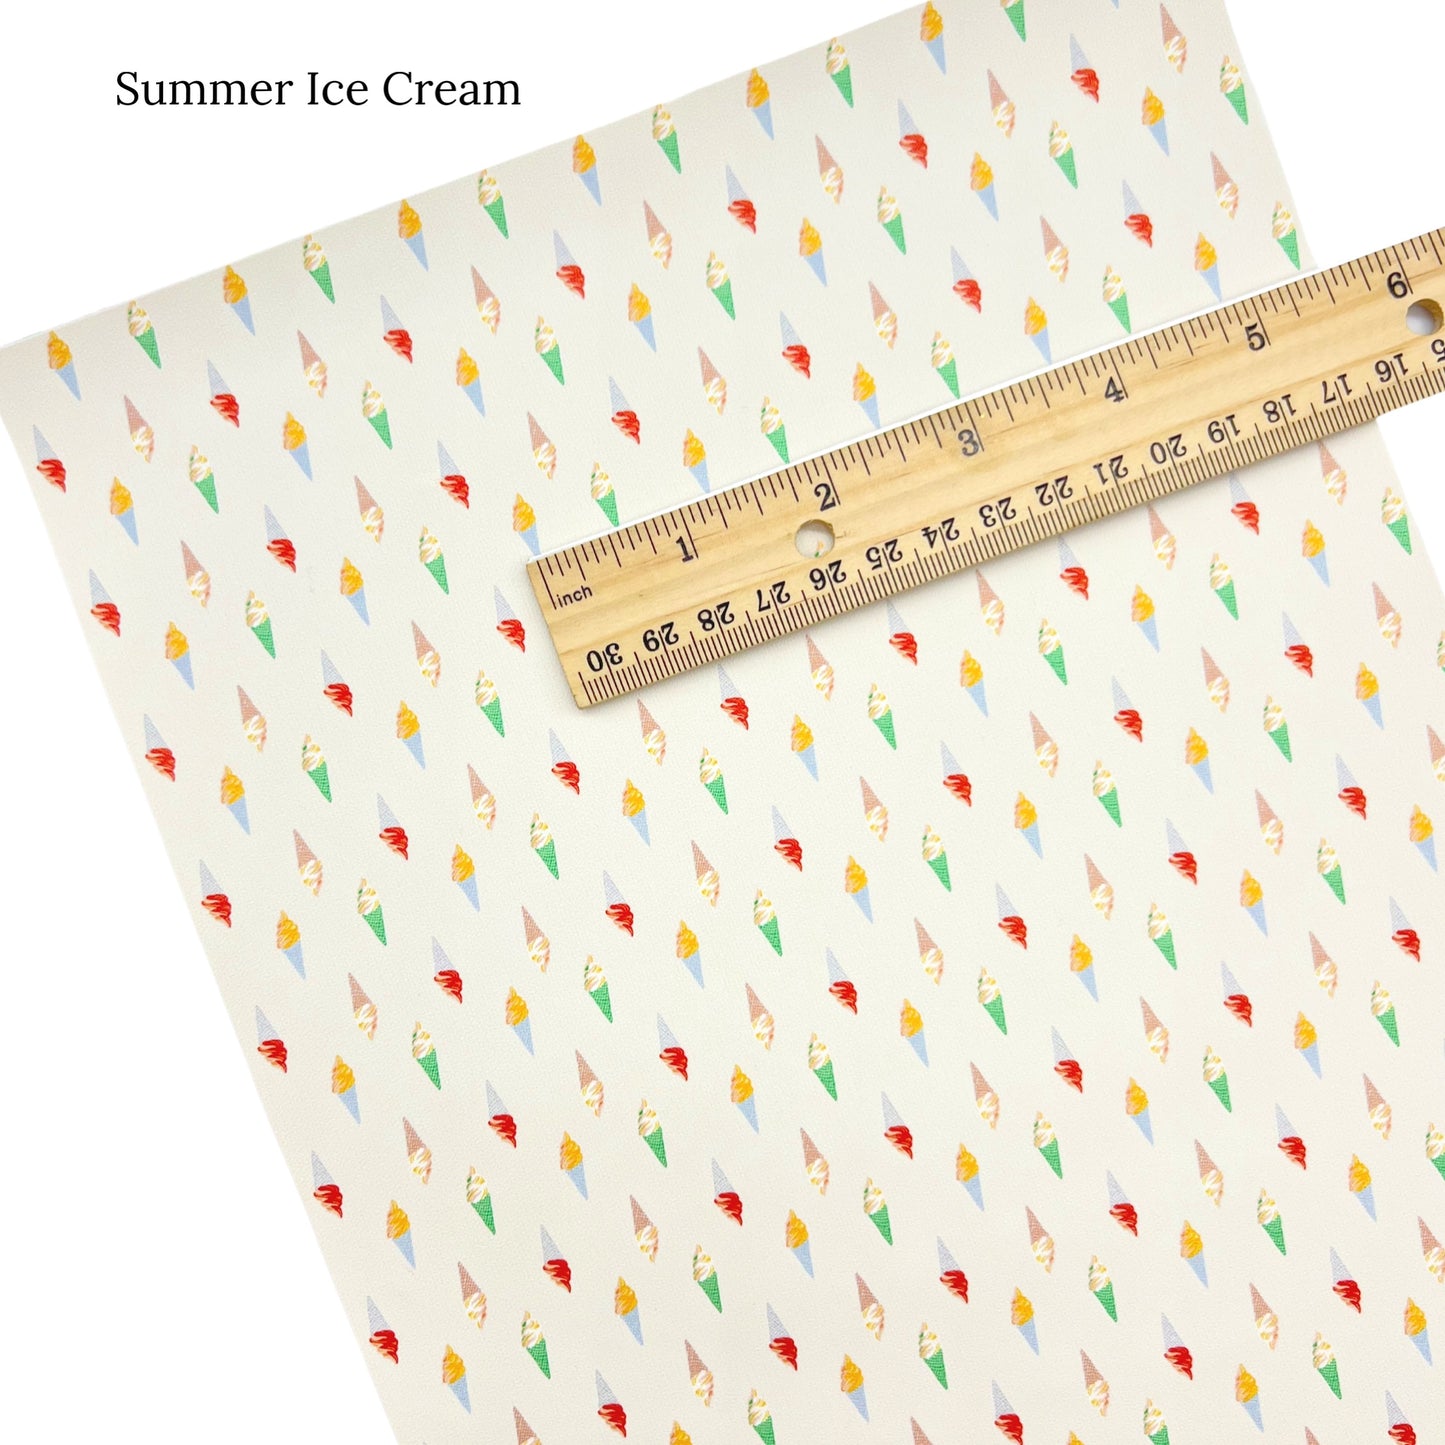 Ice cream cones for summer faux leather sheet.